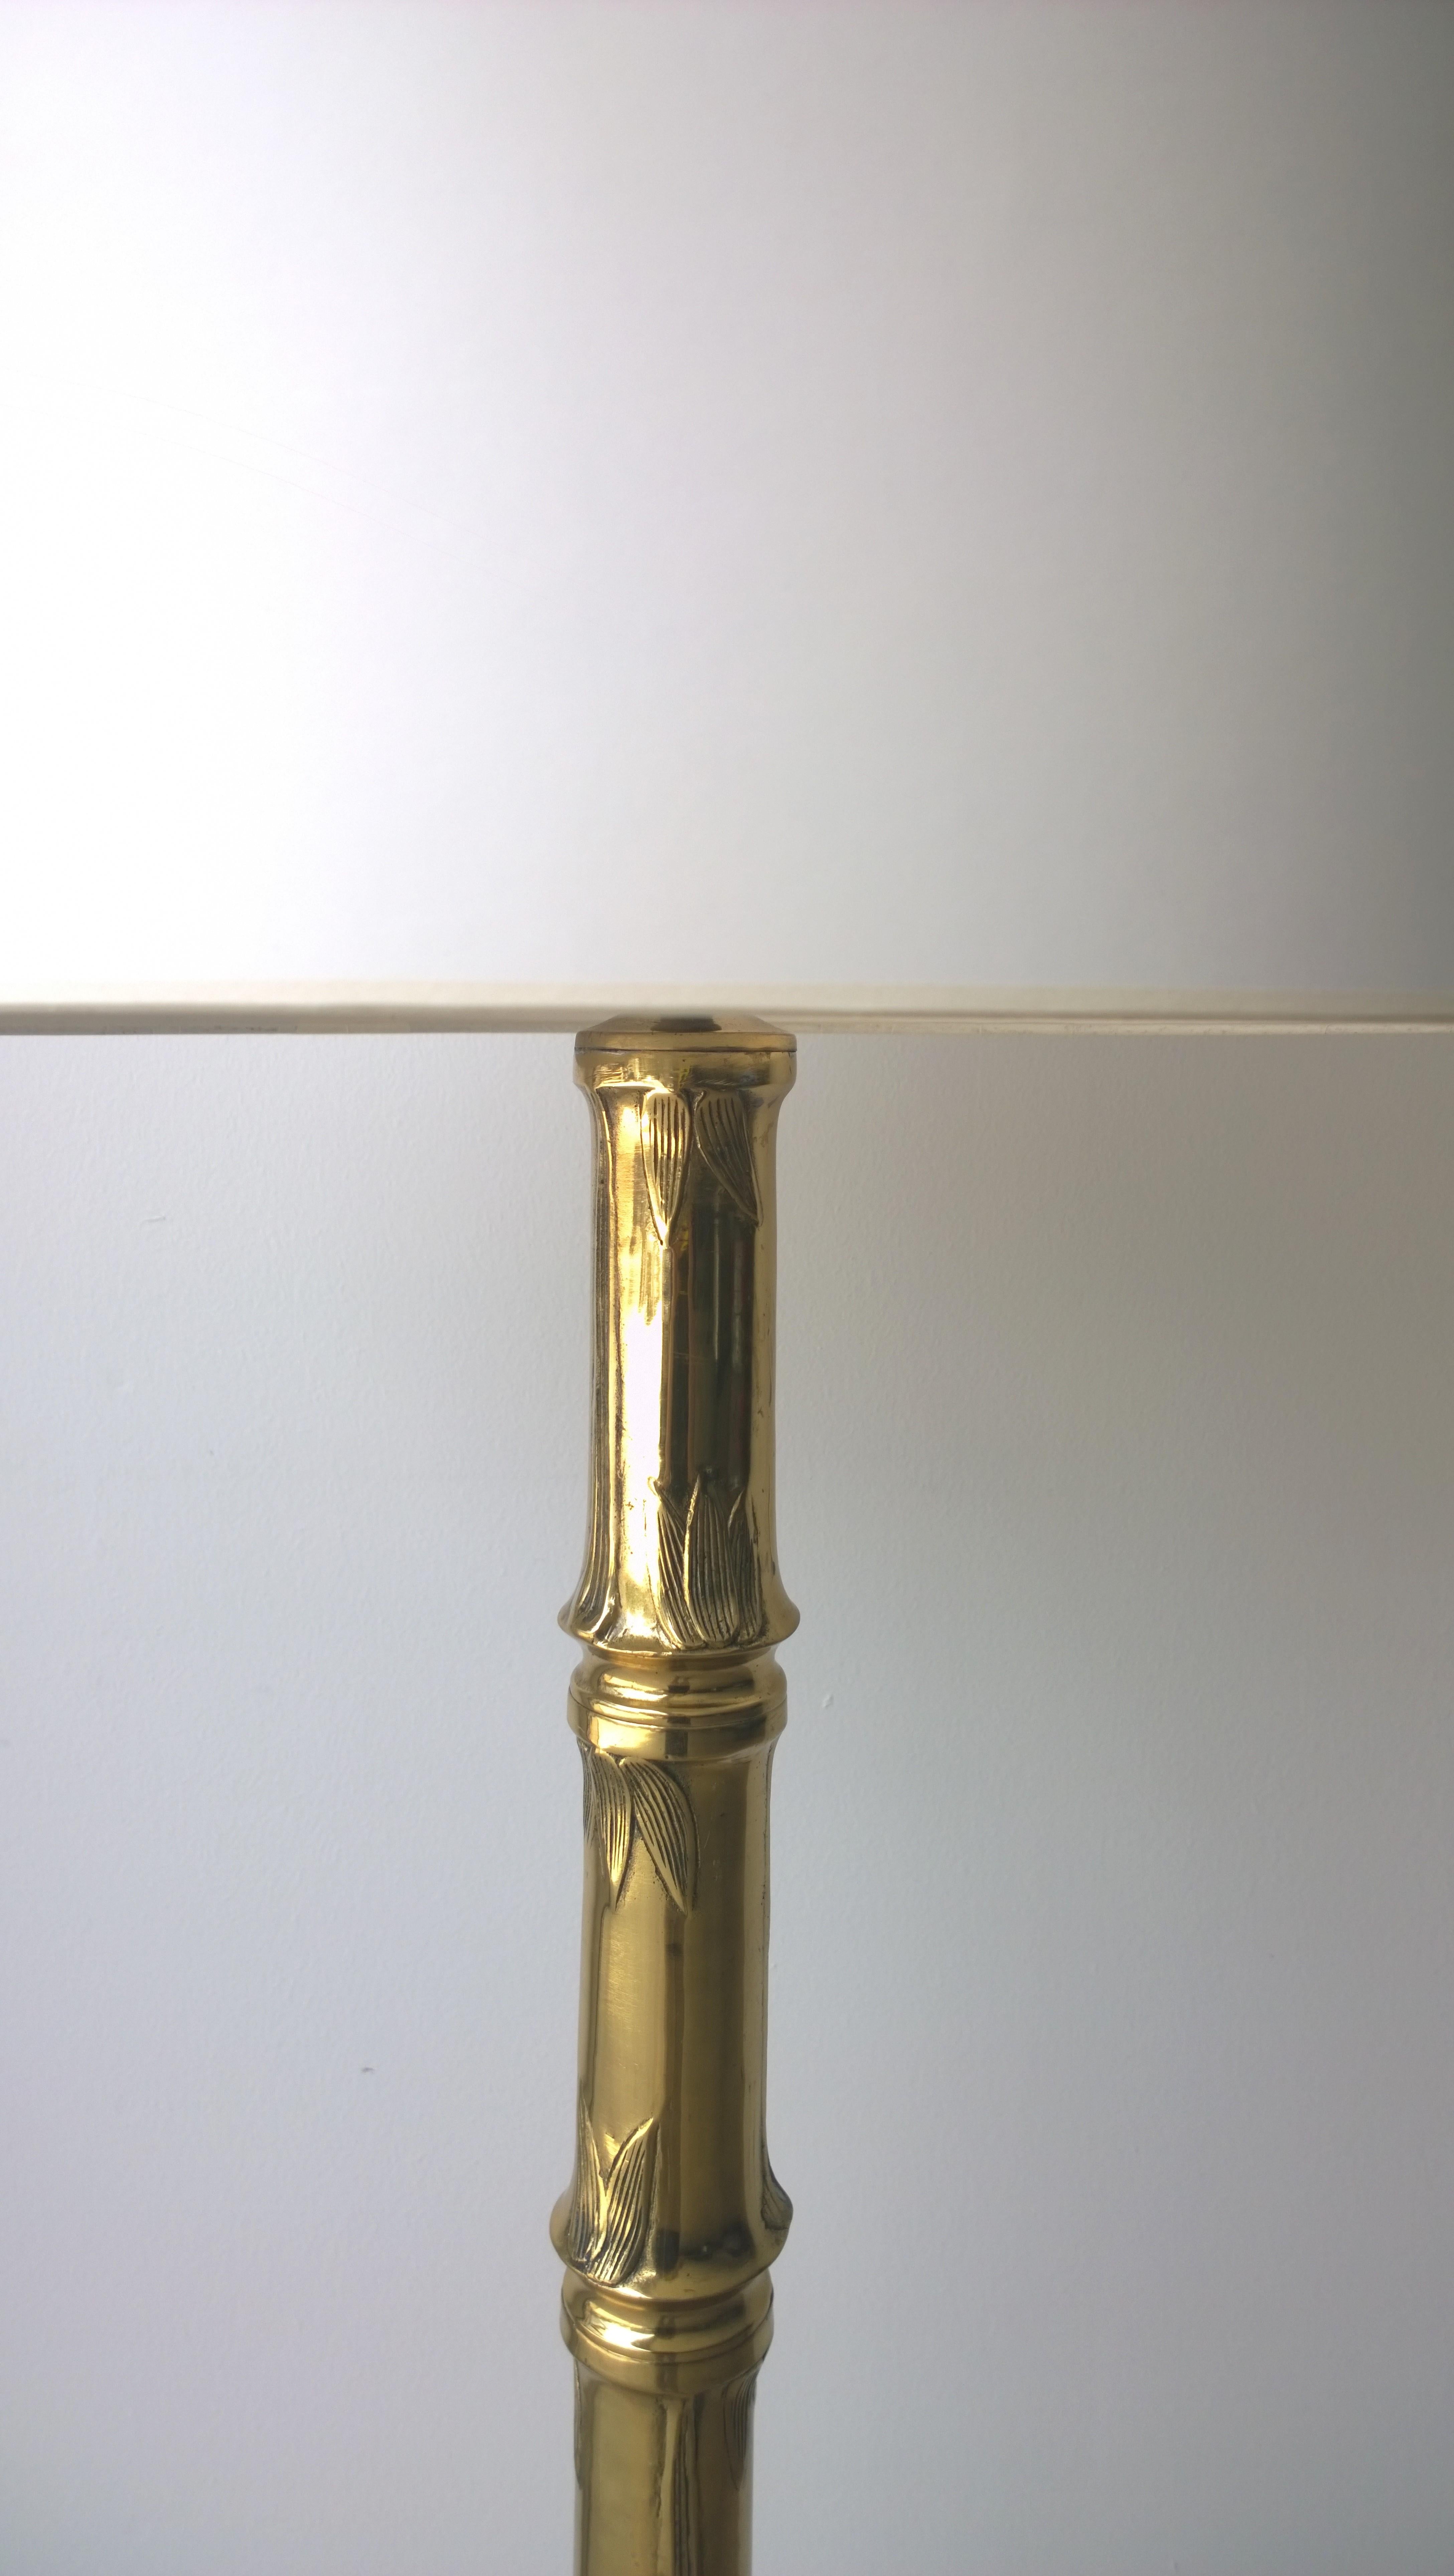 Offered is a substantial Mid-Century Modern / Hollywood glam brass faux bamboo highly stylized floor lamp. This floor lamp is so 